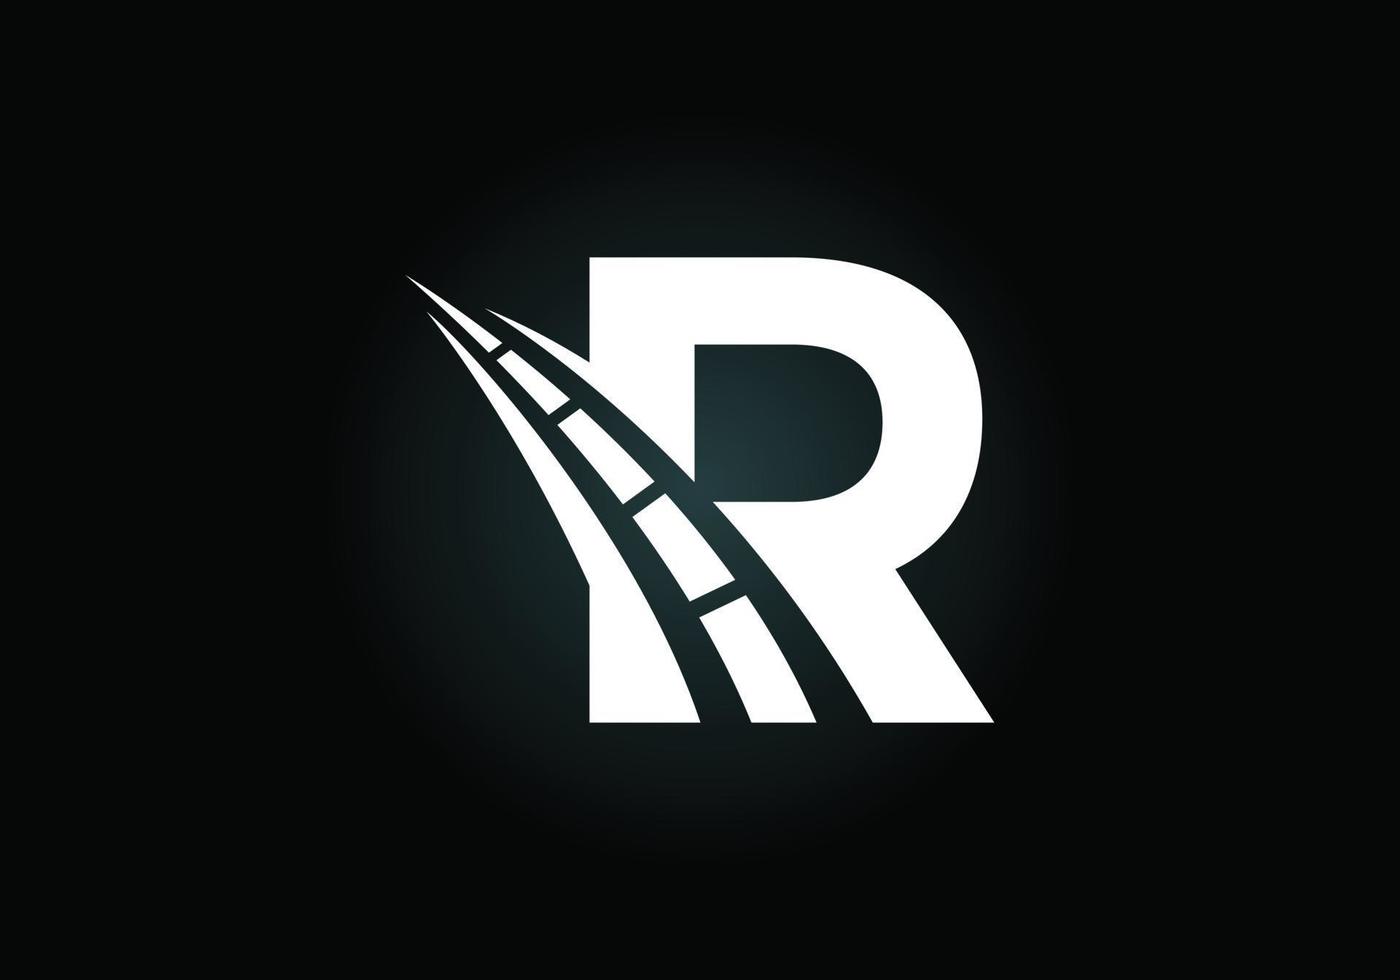 Letter R with road logo sing. The creative design concept for highway maintenance and construction. Transportation and traffic theme. vector